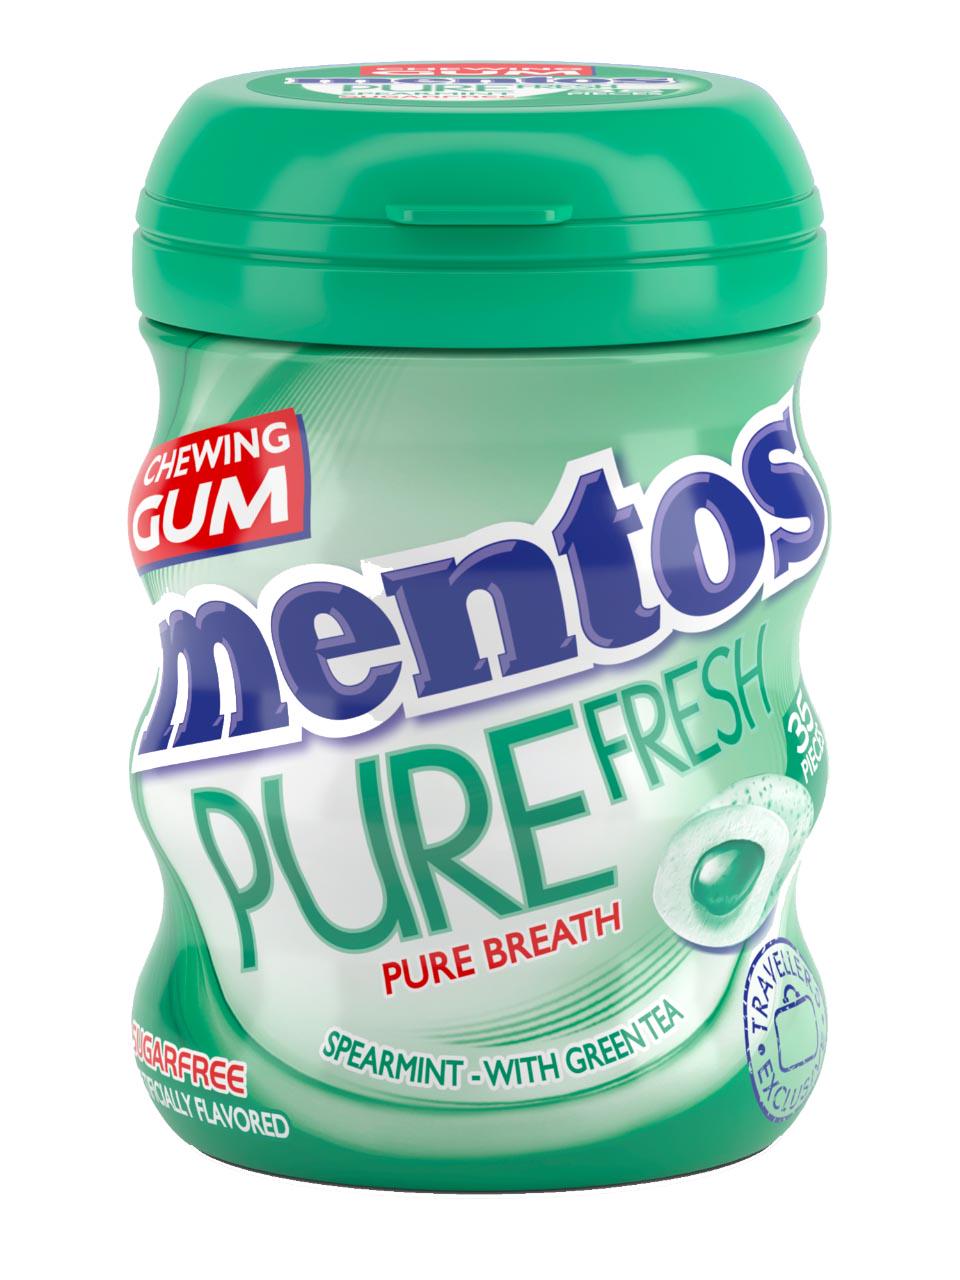 Mentos Chewing Gum Spearmint 0,06 kg, Worldwide delivery